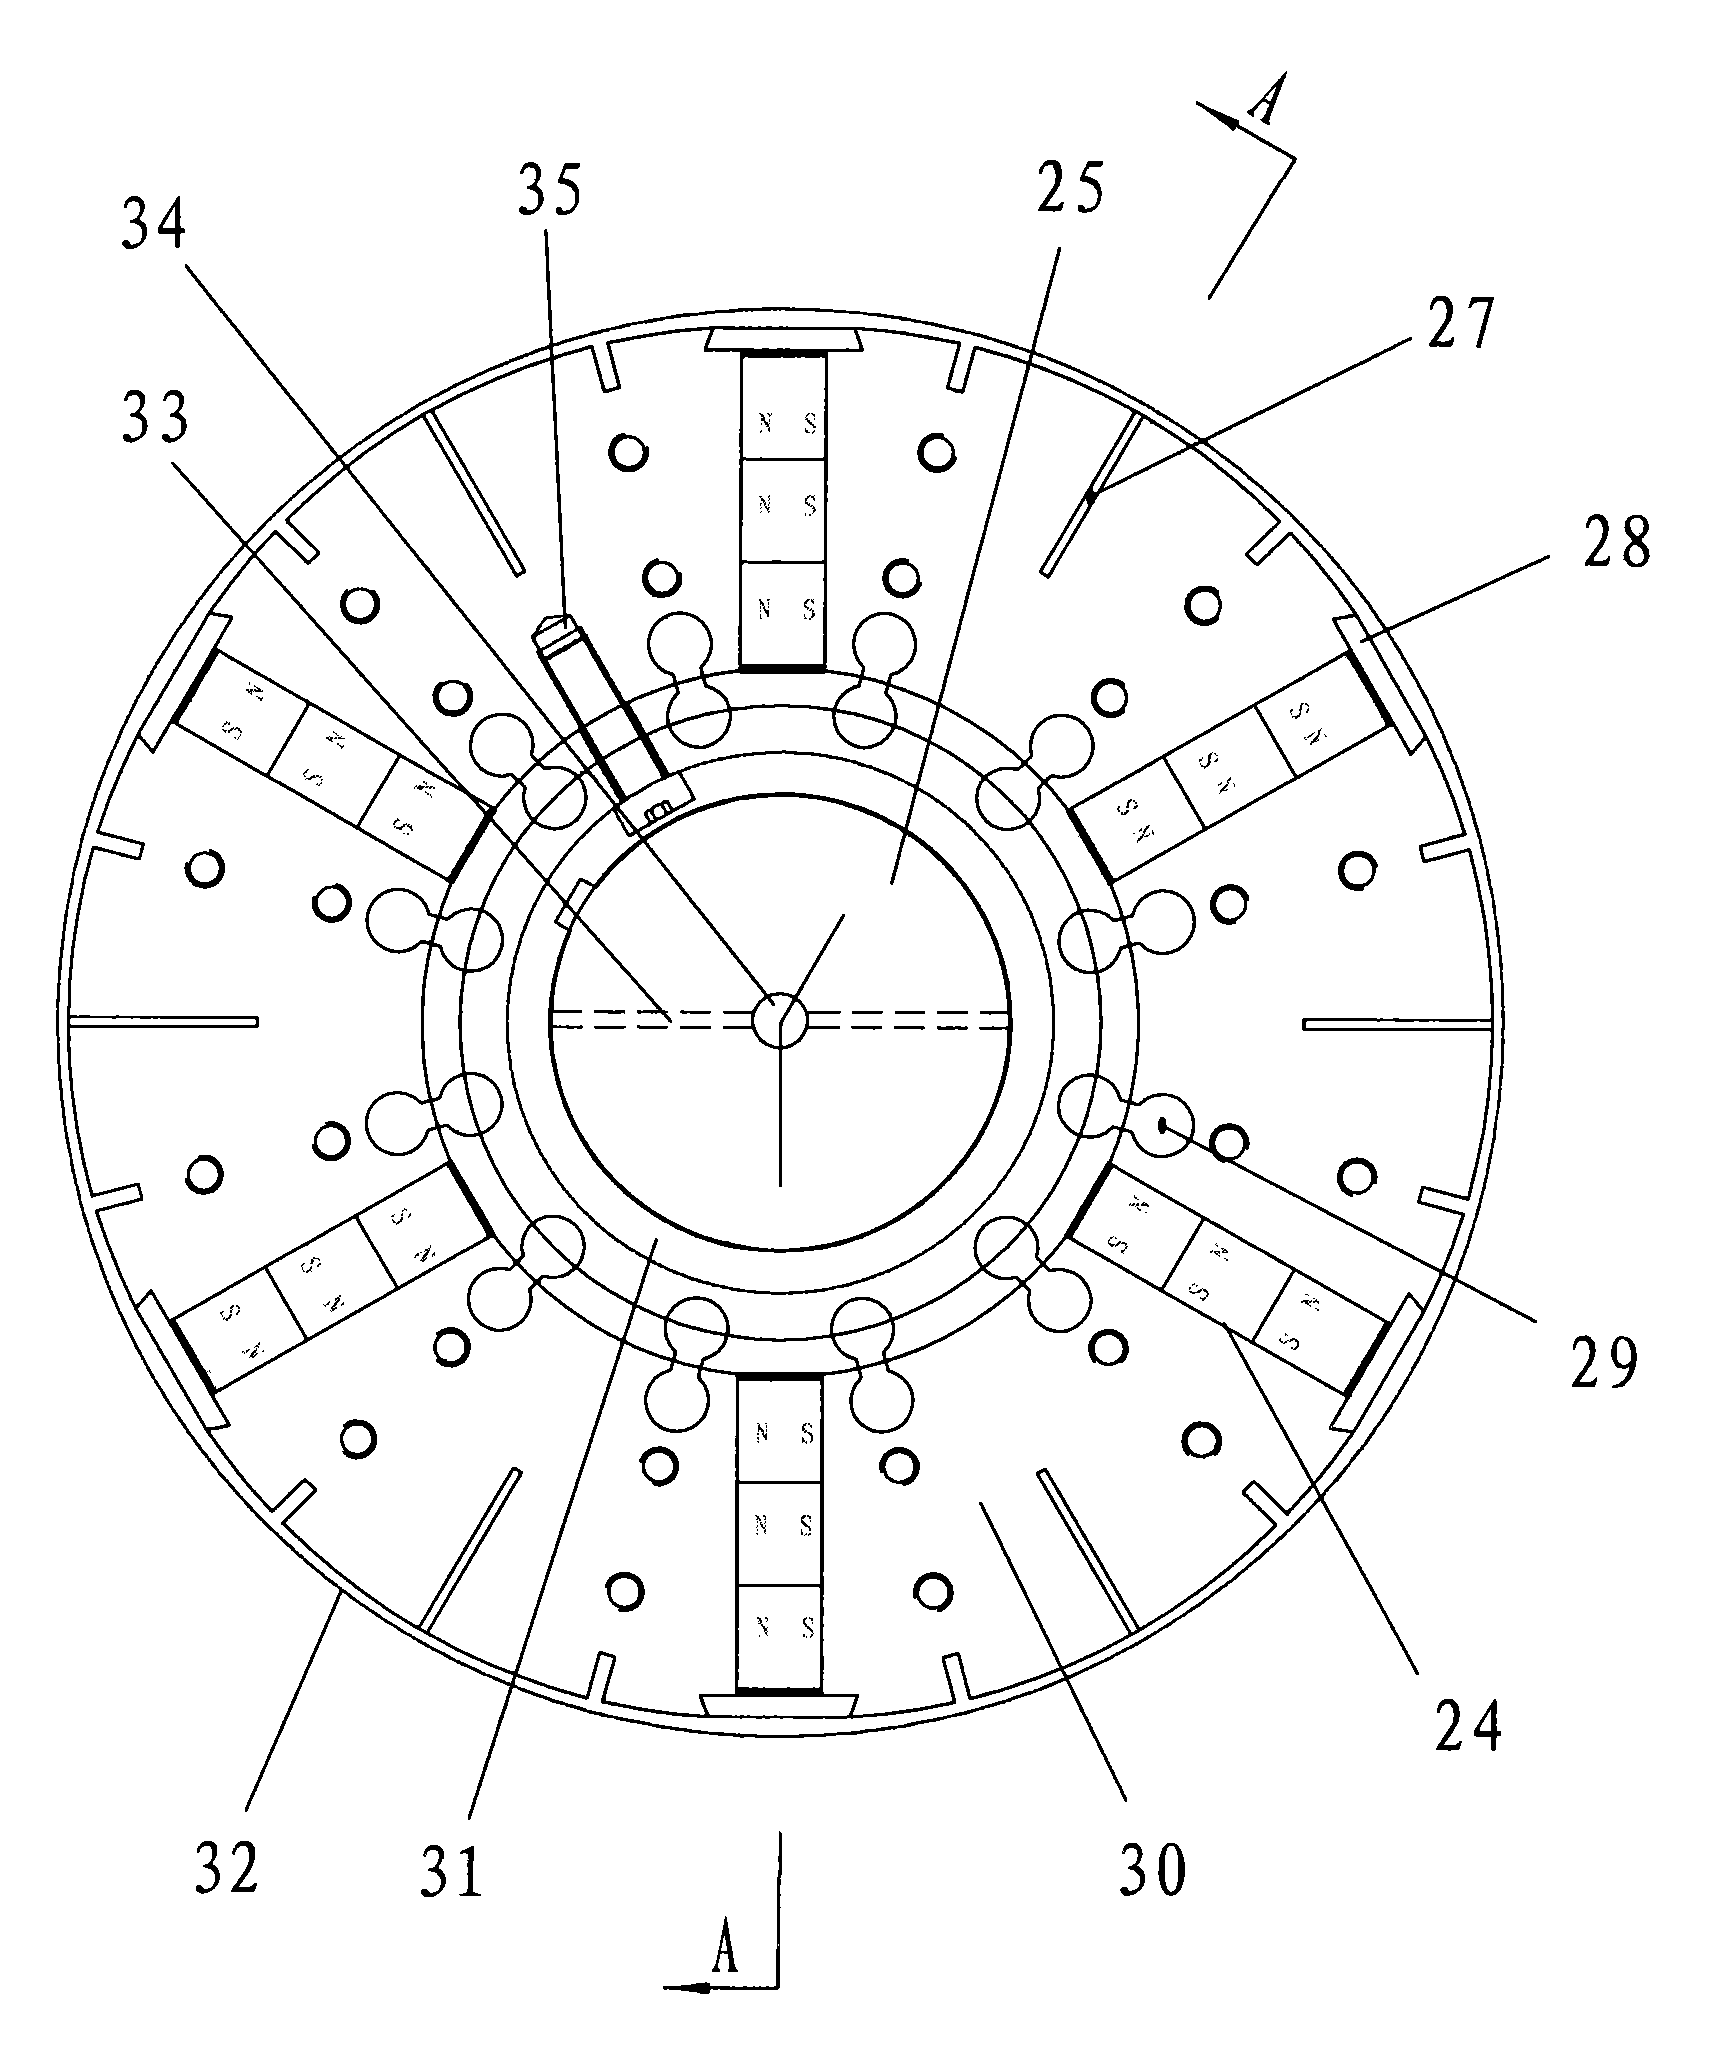 Permanent magnetic synchronous motor